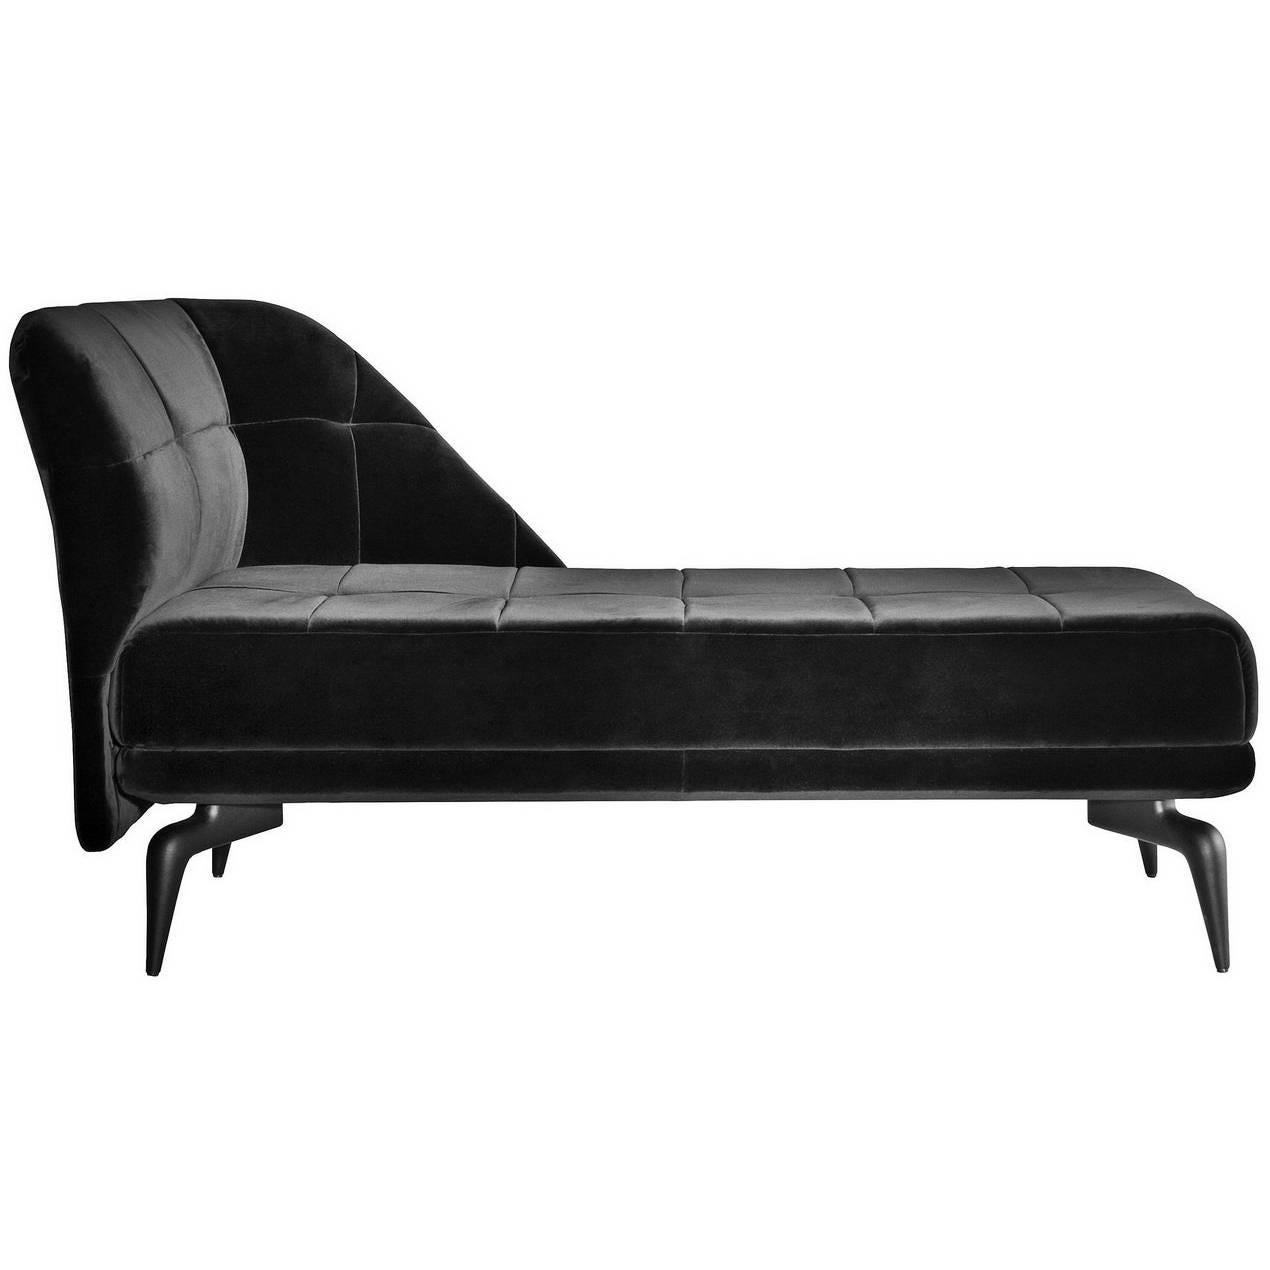 "Leeon" Velvet Covered Daybed by Ludovica and Roberto Palomba for Driade For Sale